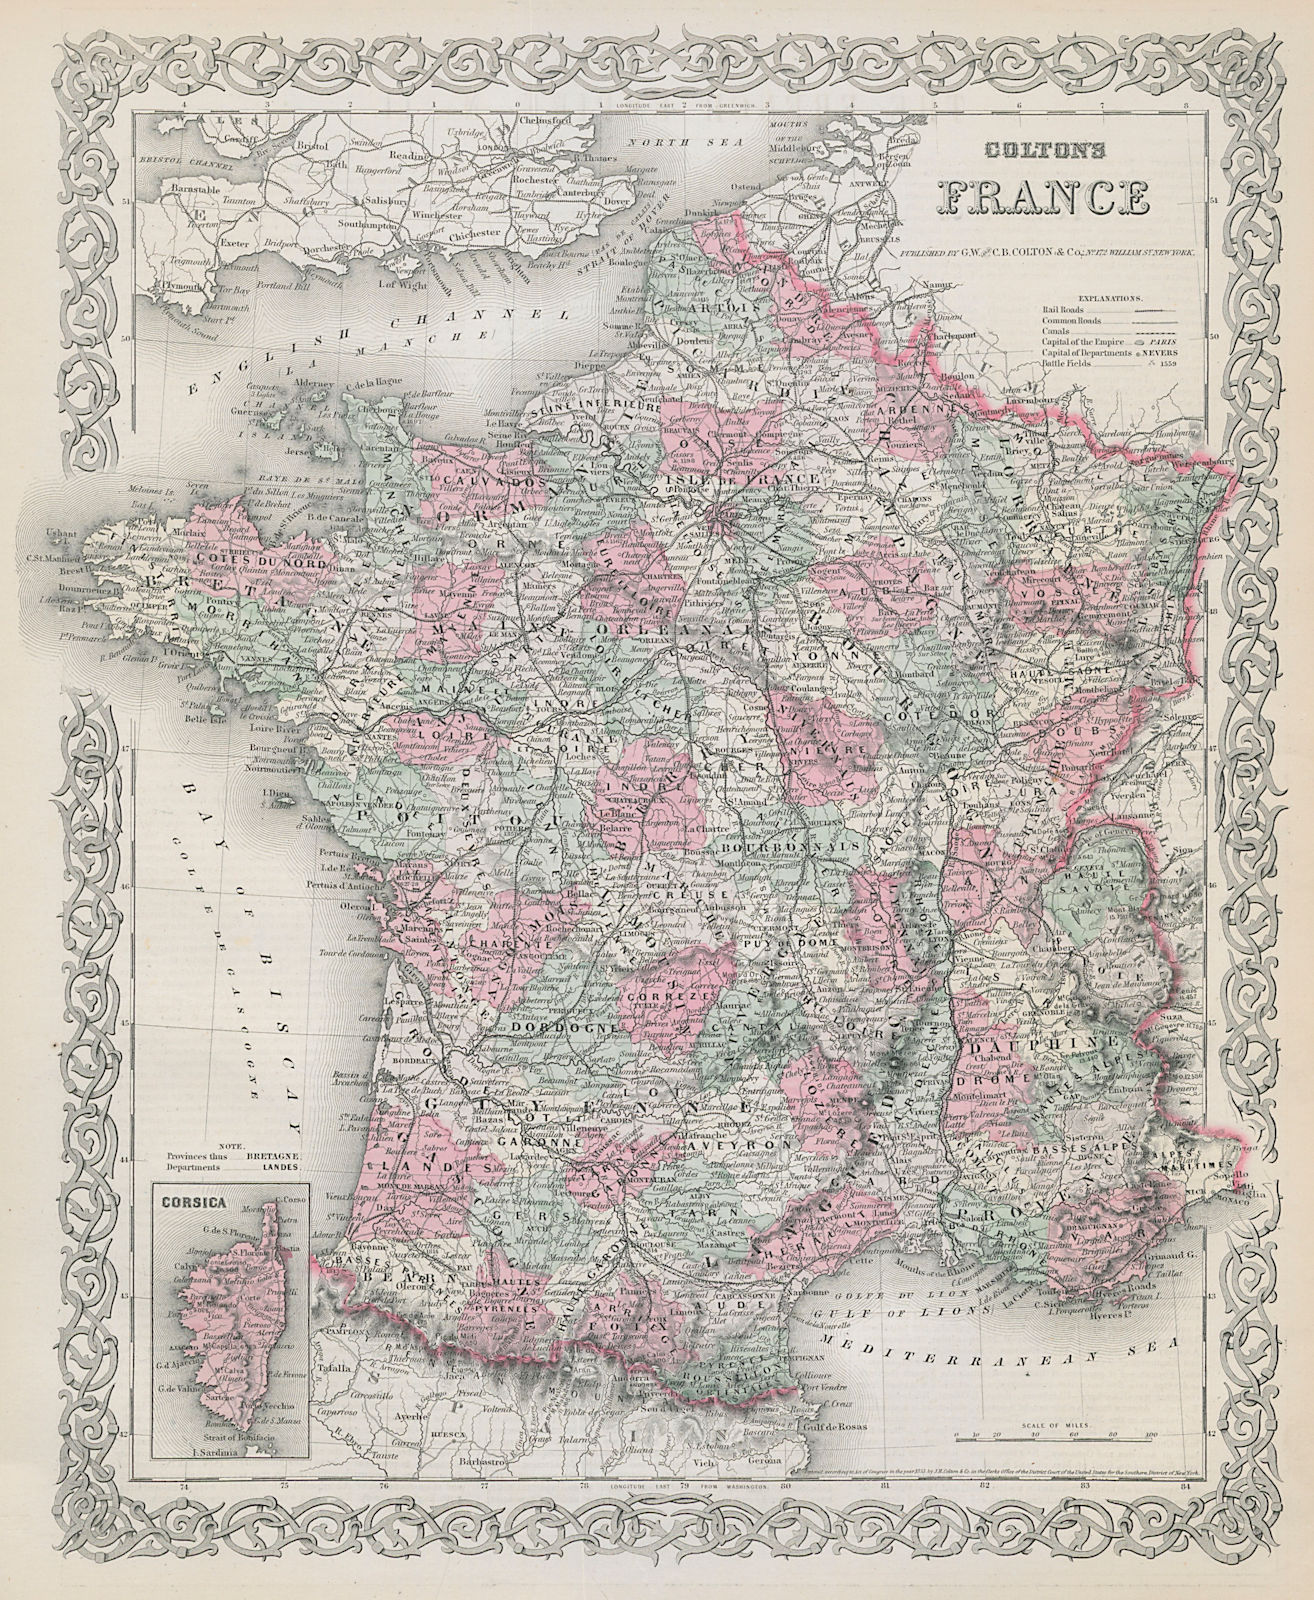 Associate Product Colton's France in departments and provinces. Decorative antique map 1869